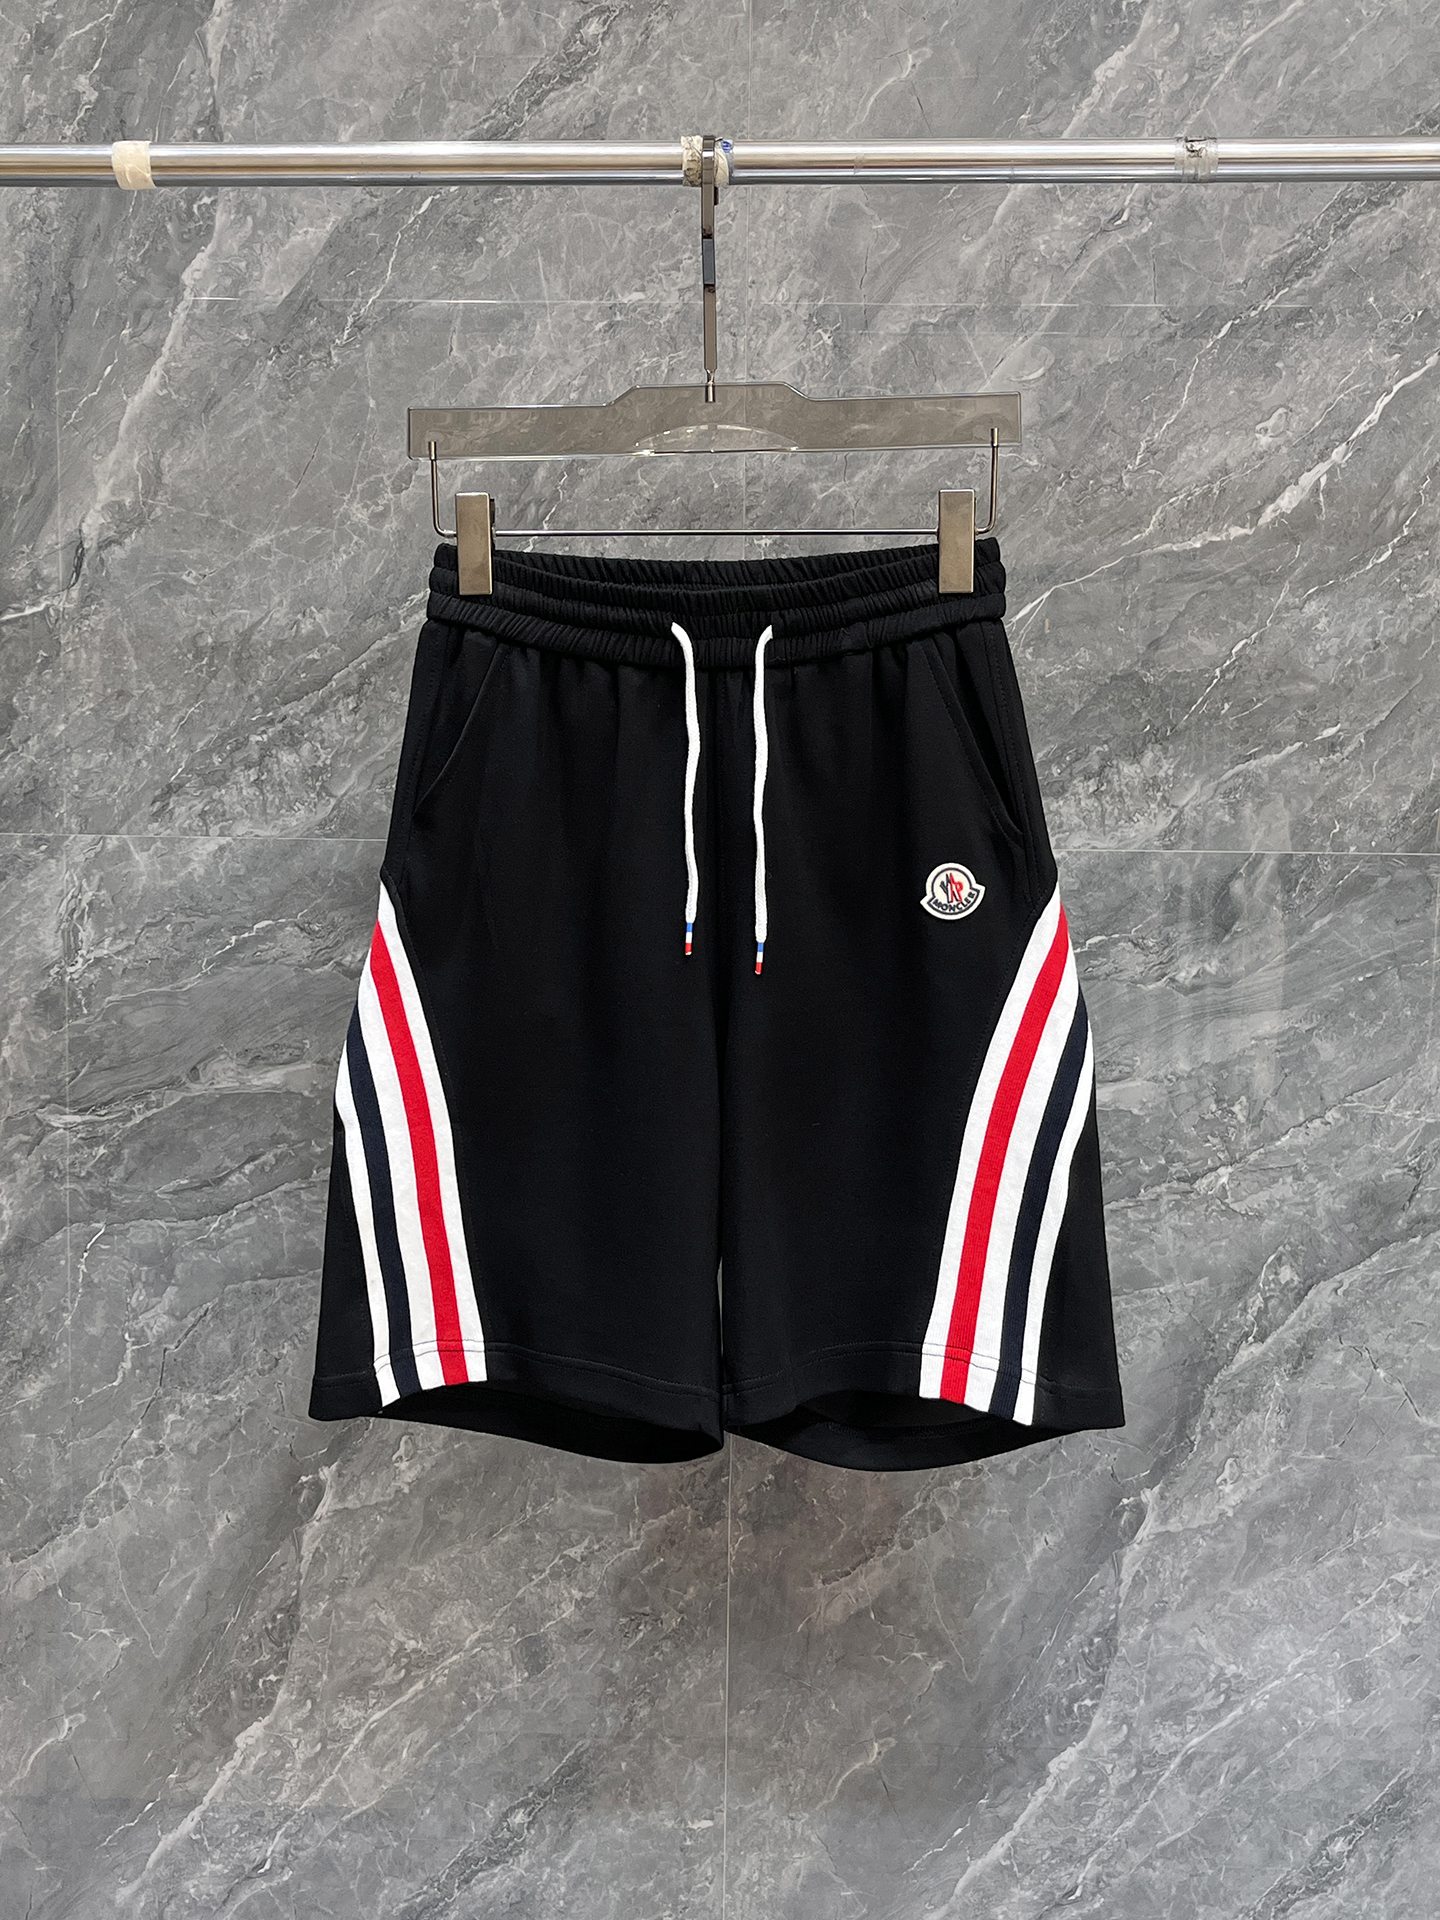 Moncler Clothing Shorts Top Sale
 Men Summer Collection Casual